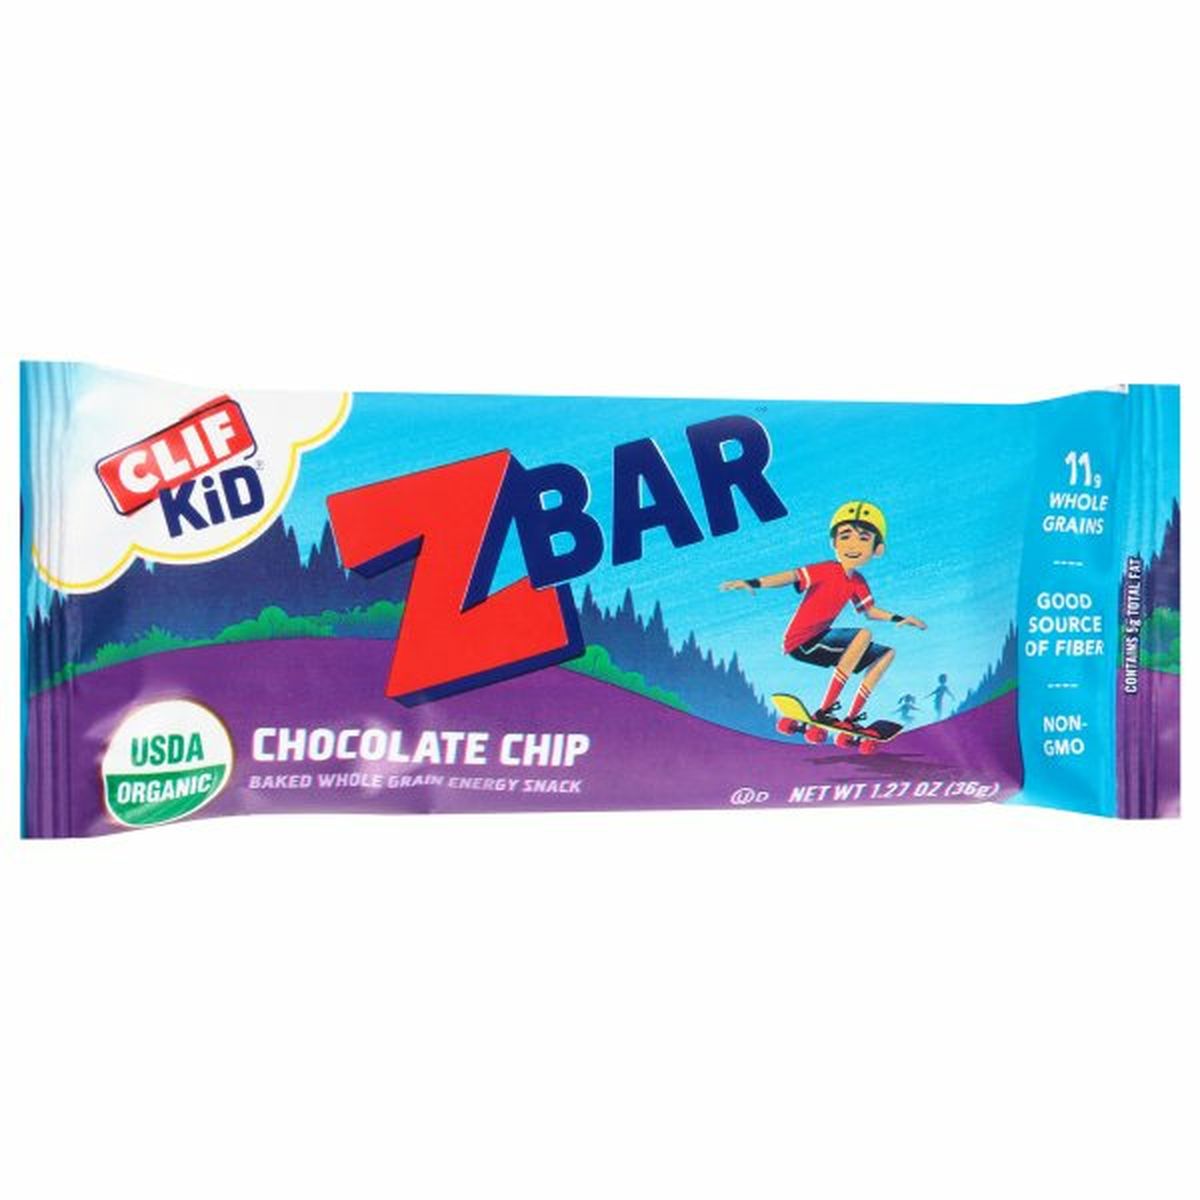 Calories in CLIF Kid , Chocolate Chip